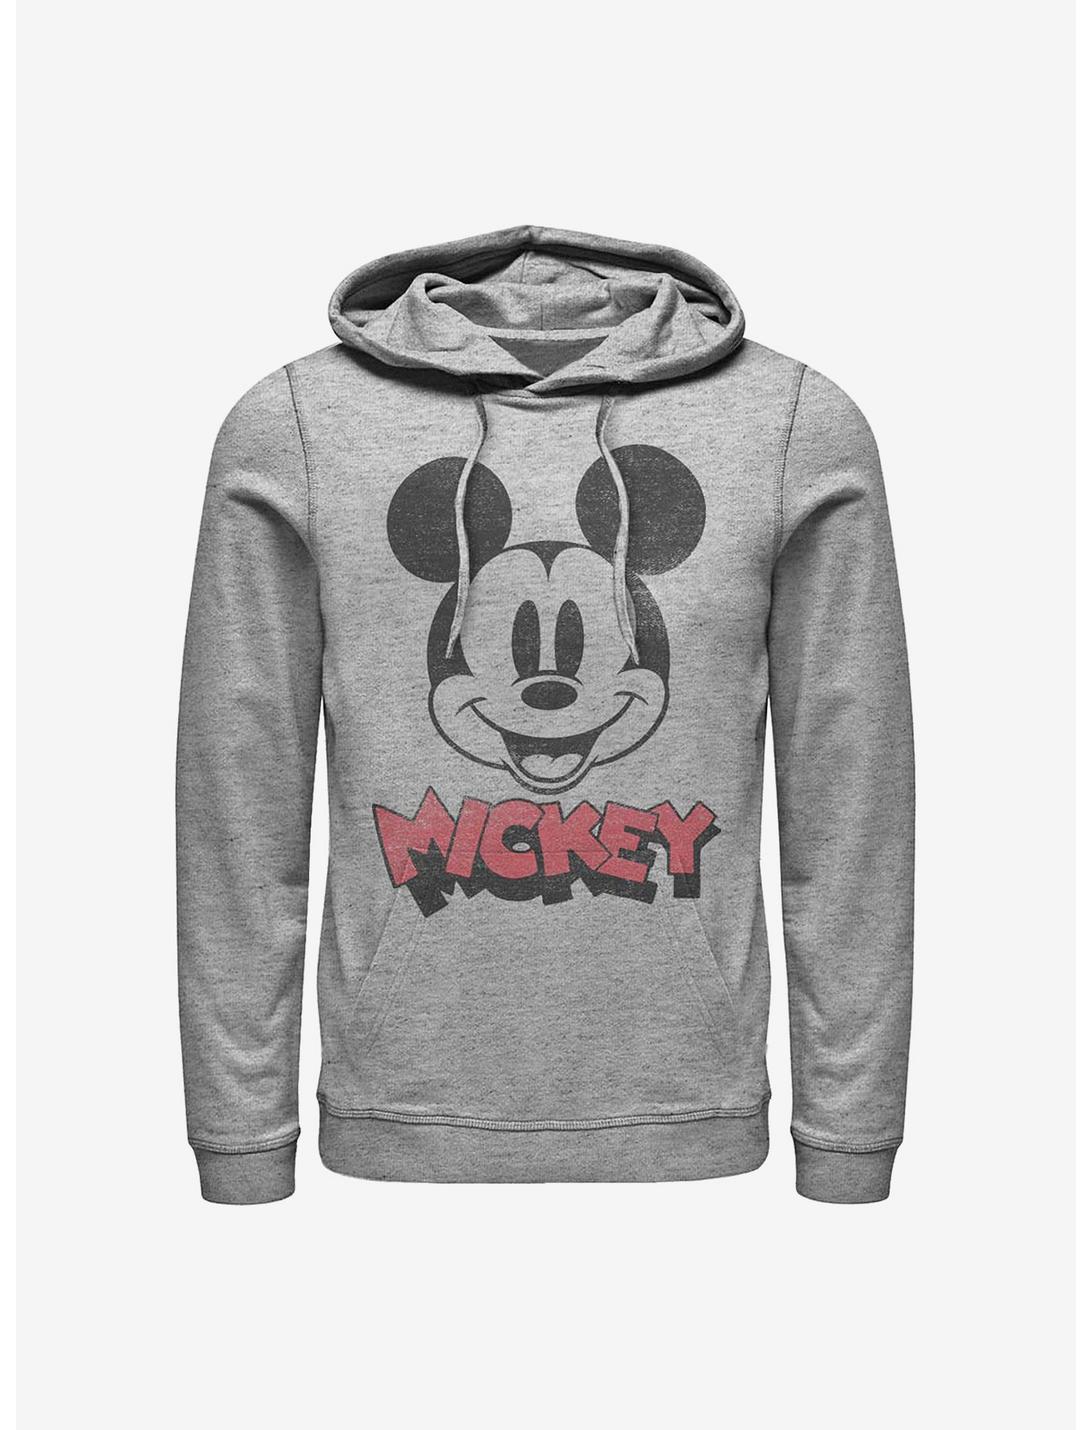 Disney Mickey Mouse Heads Up Hoodie, ATH HTR, hi-res